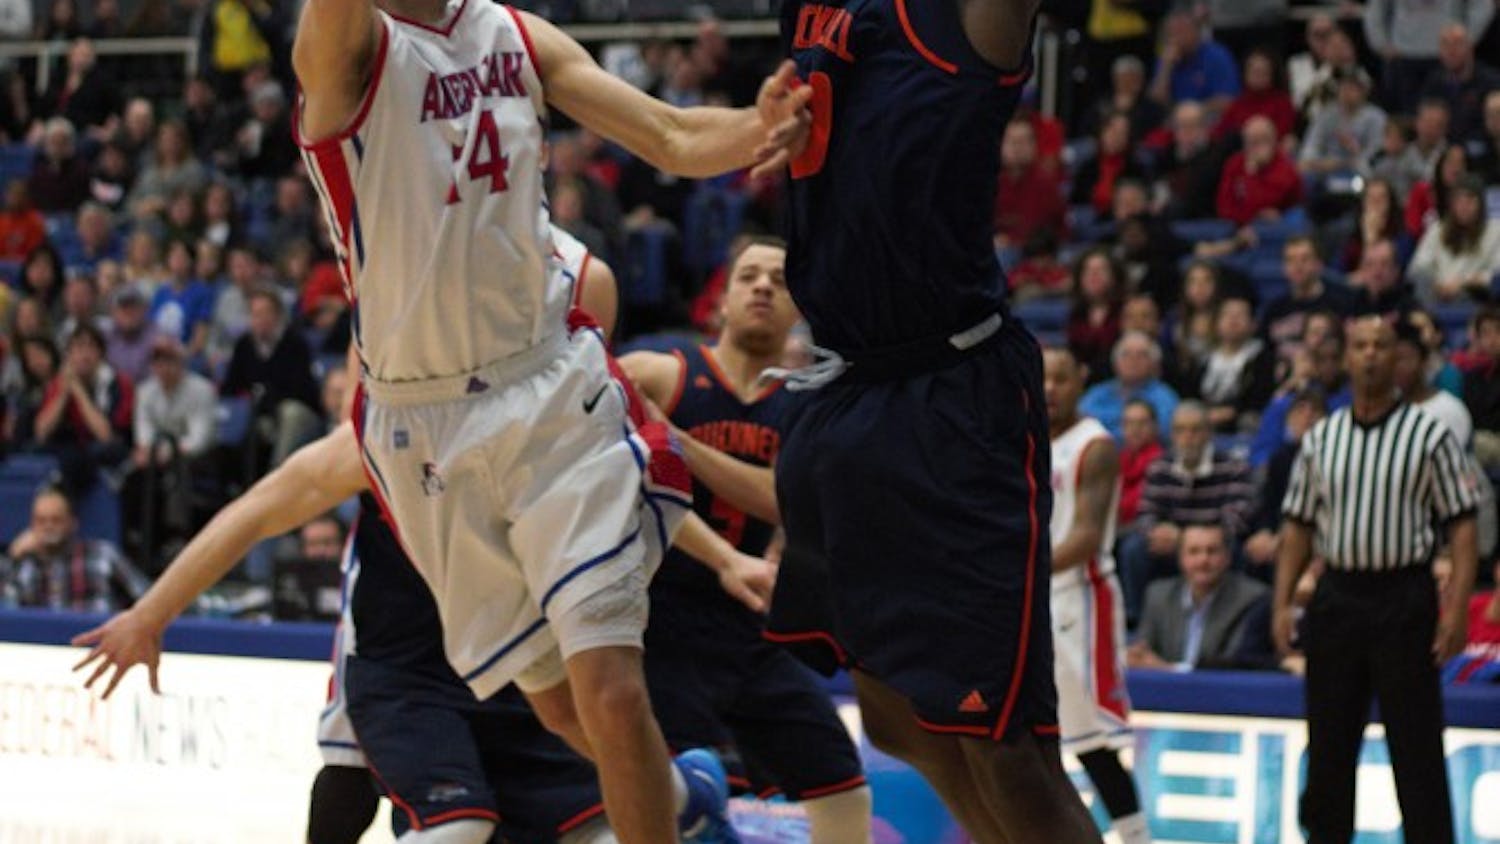 Senior Jesse Reed takes a shot over a Bucknell defender during a game last season. Photo credit: Bryan Park/ THE EAGLE&nbsp;